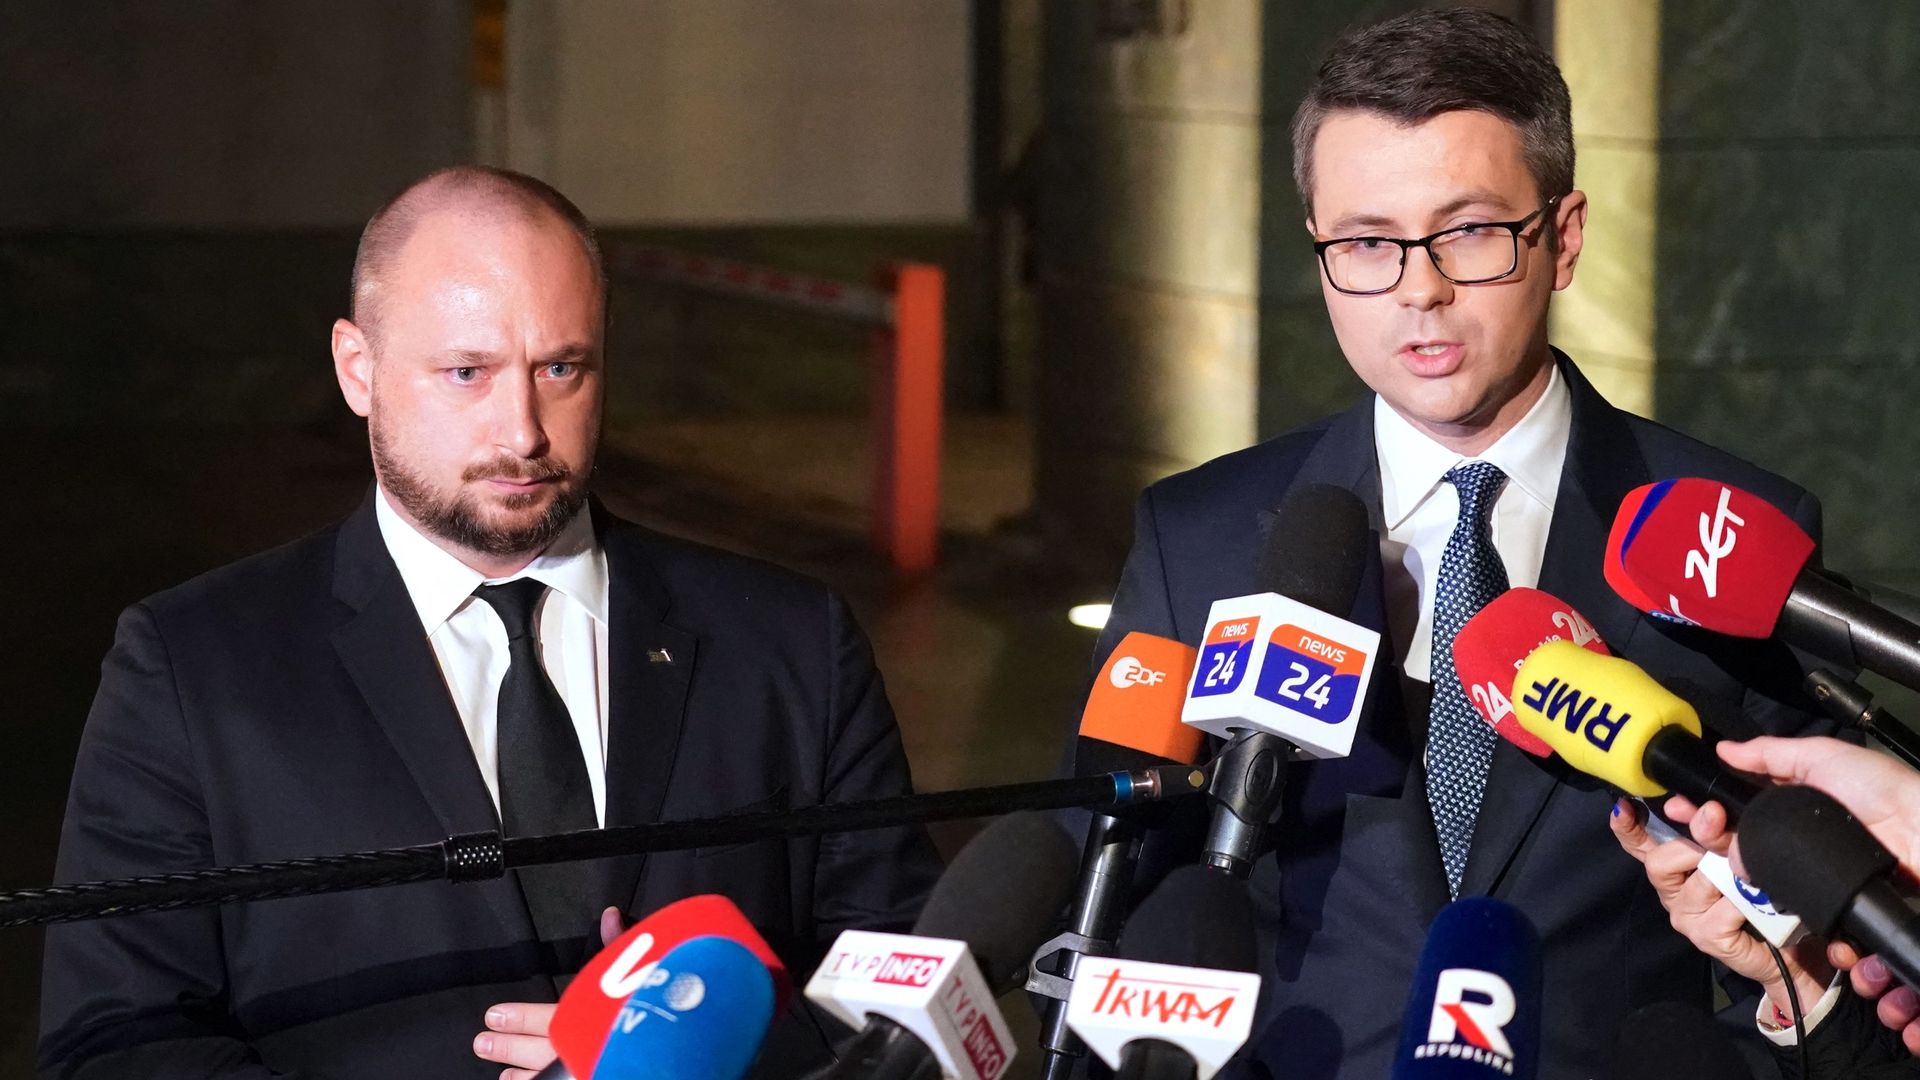 Head of the Office of National Security, Jacek Siewiera (L), and Spokesperson of the Polish government, Piotr Muller, make a statement